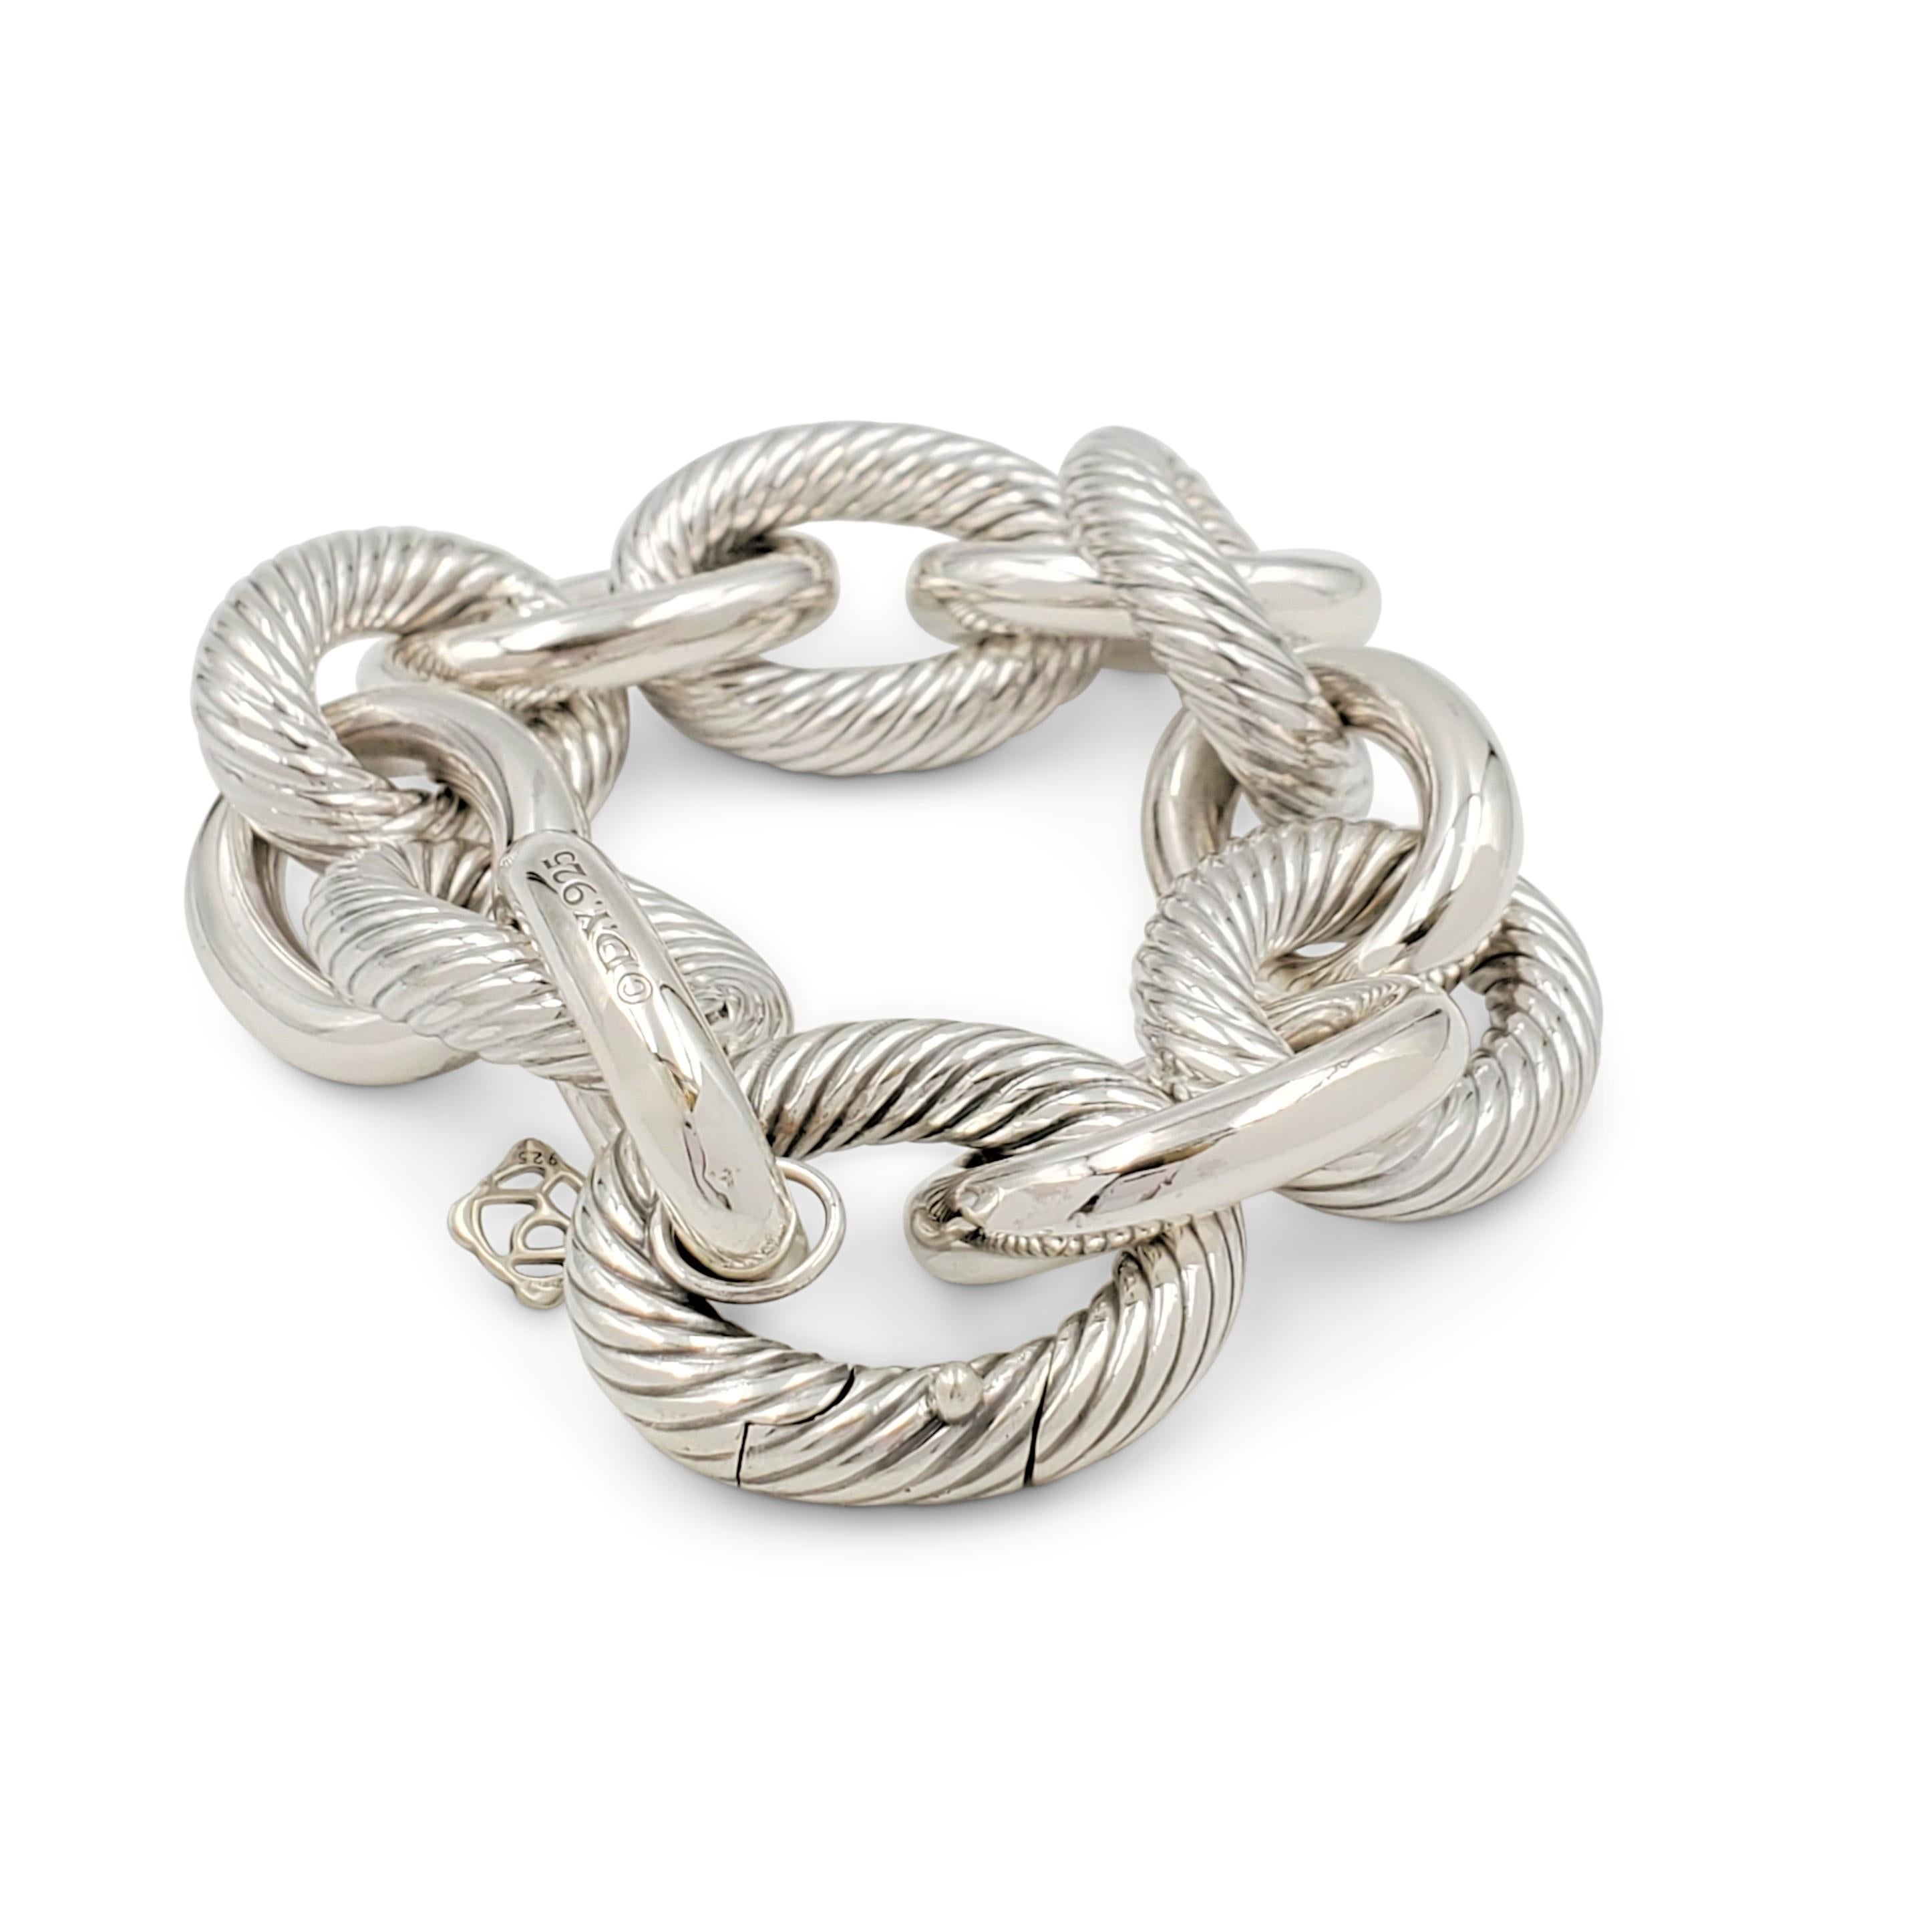 Authentic David Yurman bracelet crafted in sterling silver features alternating high-polish and cable textured extra-large oval links. Signed DY, 925. The bracelet measures 8 1/2 inches in length and features a push clasp. Not presented with the